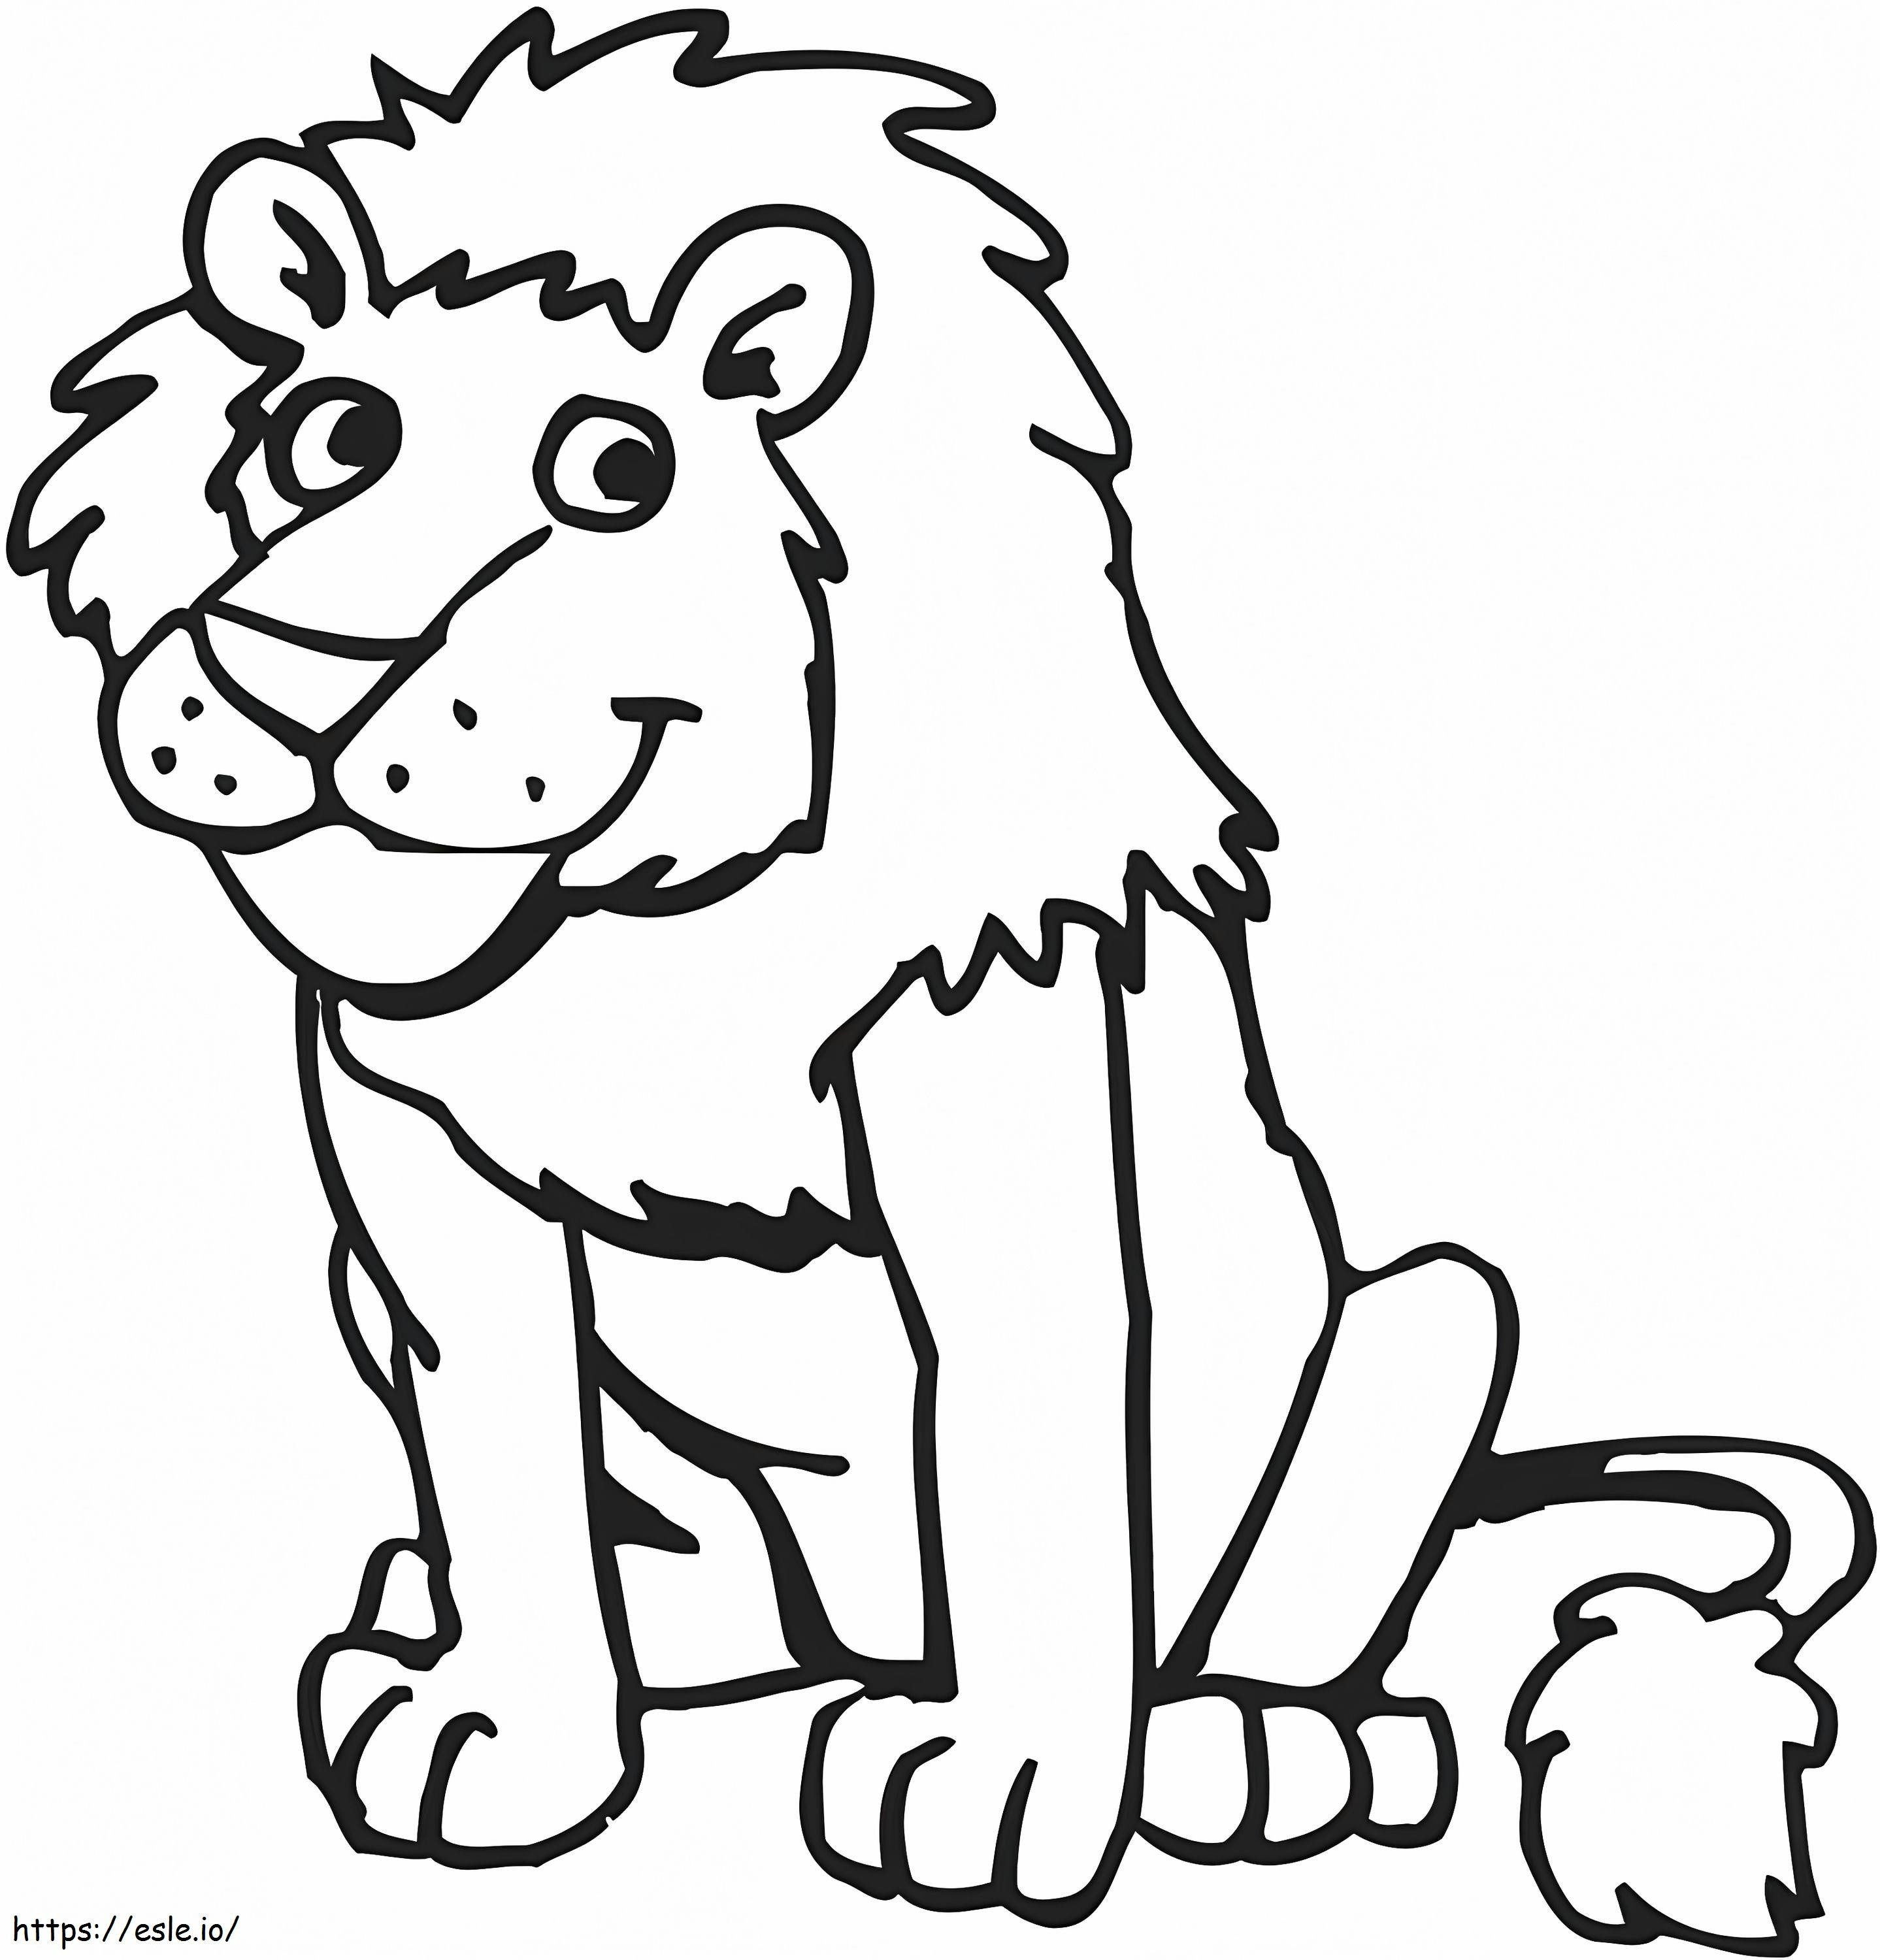 Smiling Lion coloring page